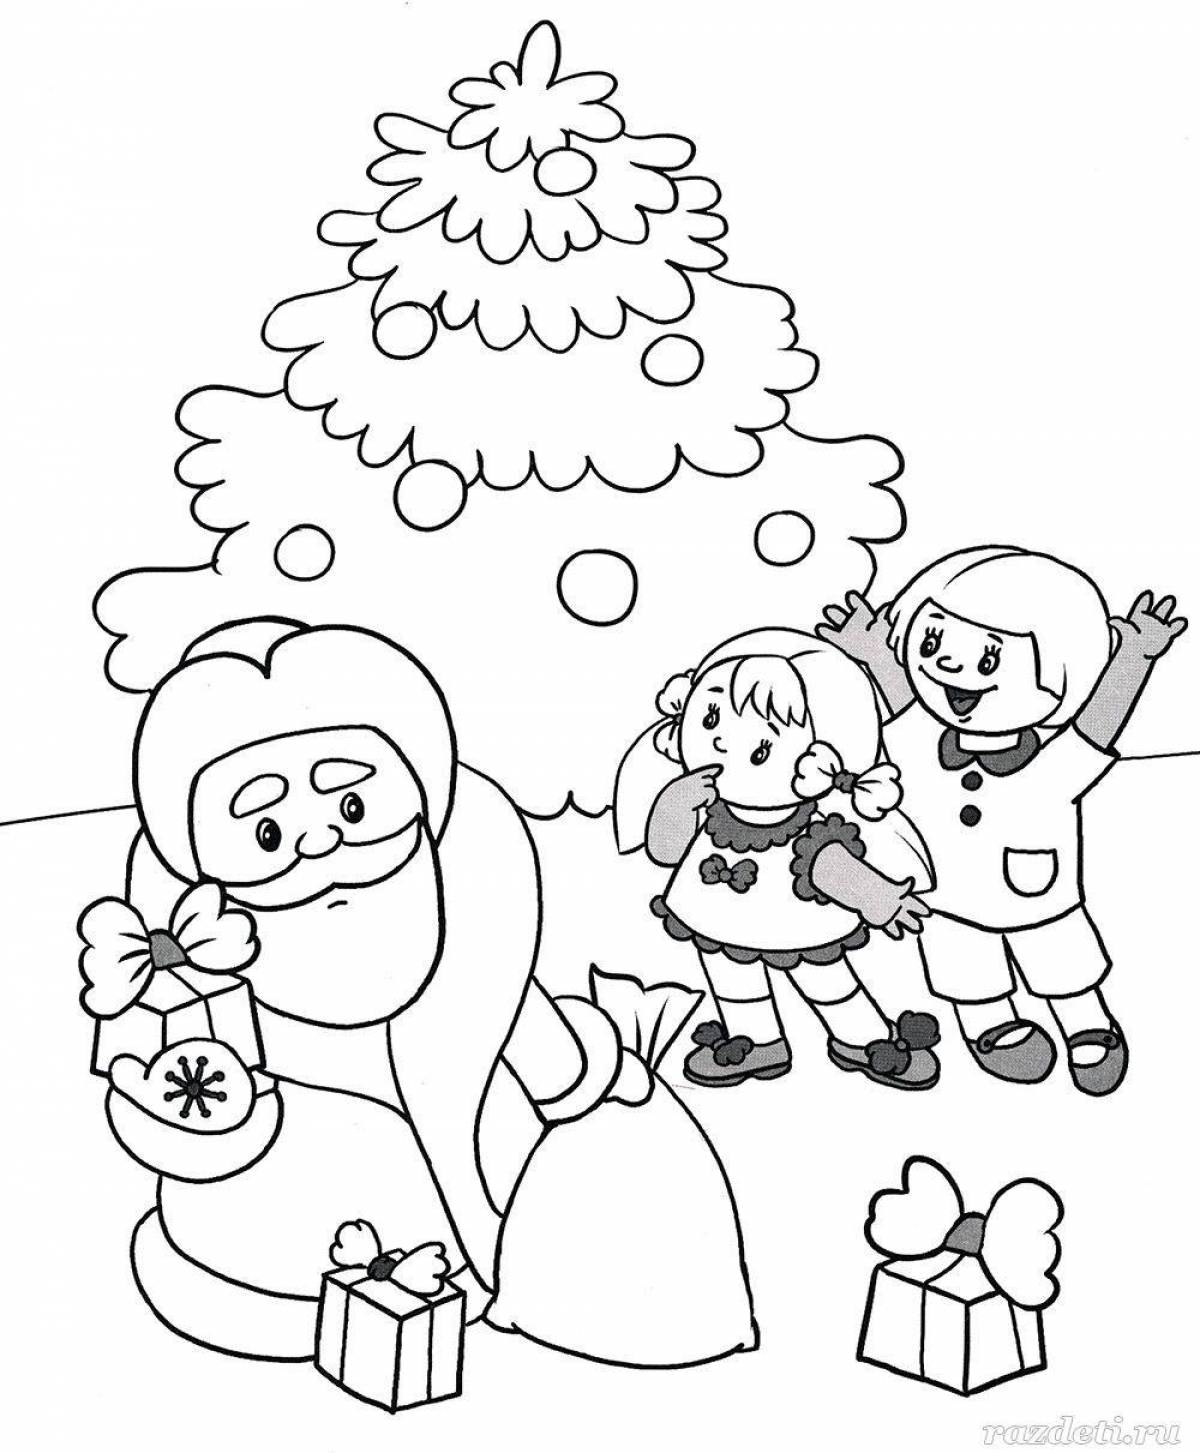 Fantastic winter coloring book for kids 5-6 years old